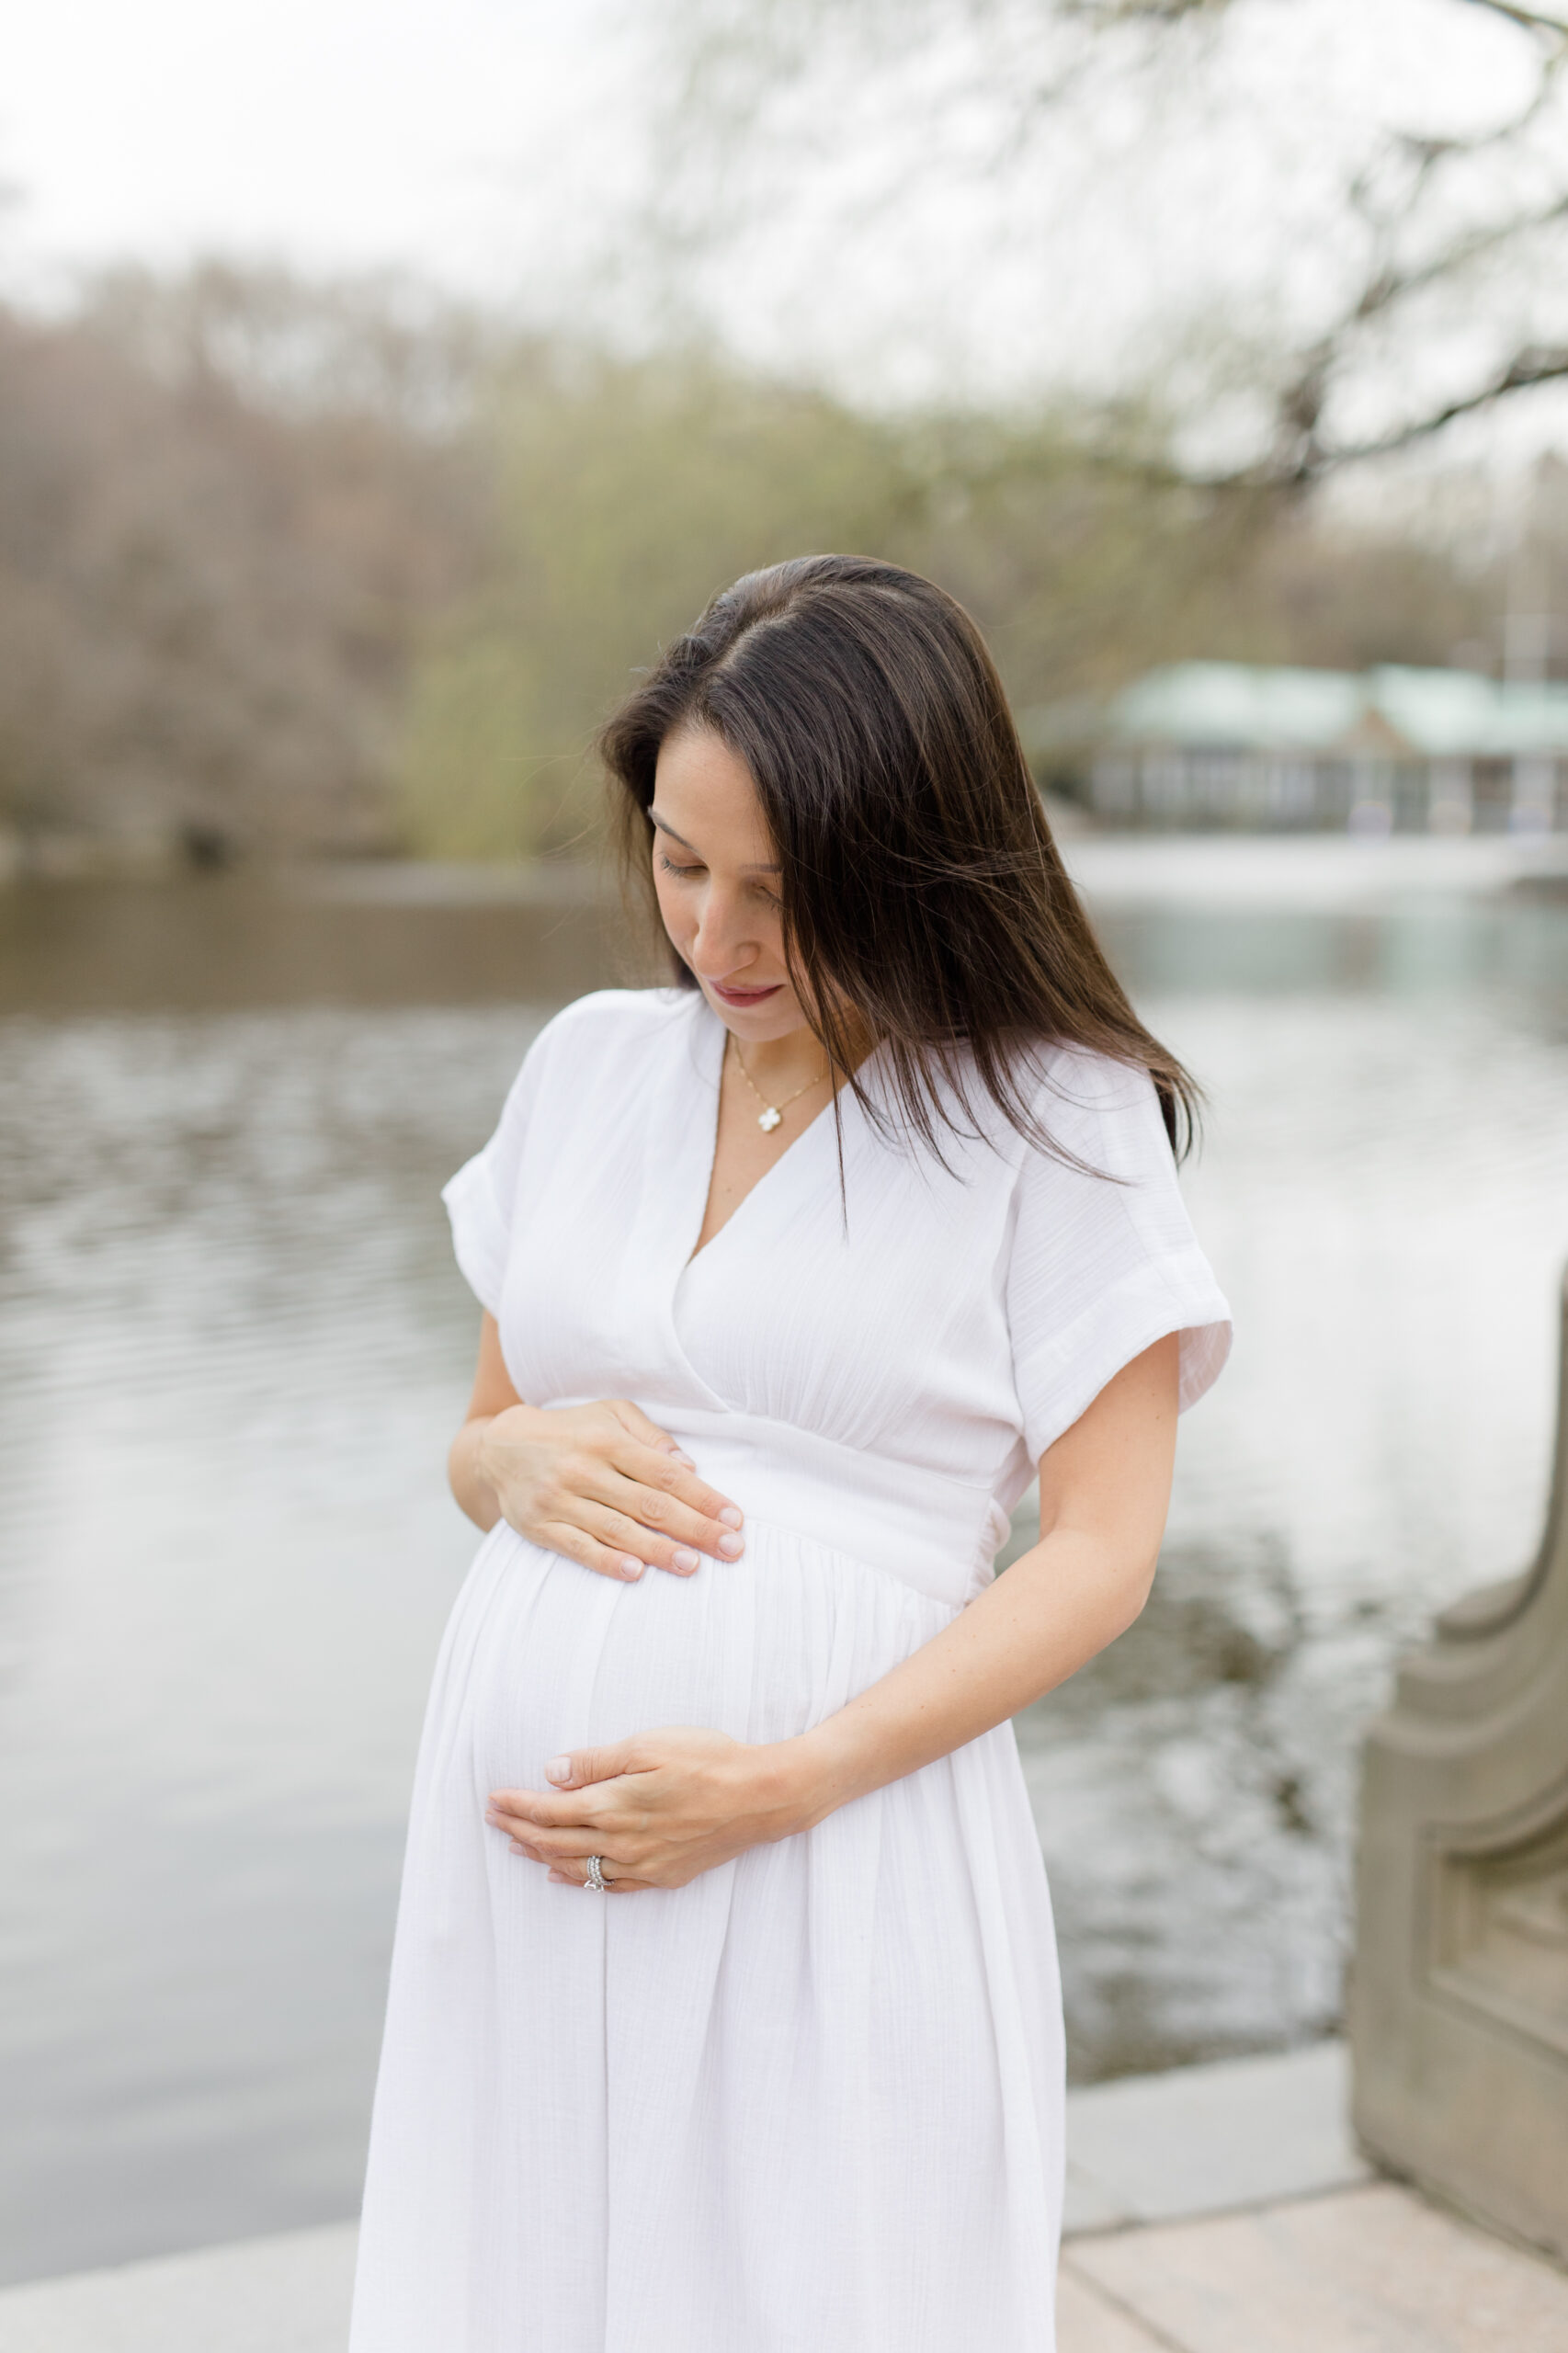 An expecting mother looks at her bump in Central Park during a New York City maternity photography session with Jacqueline Clair Photography